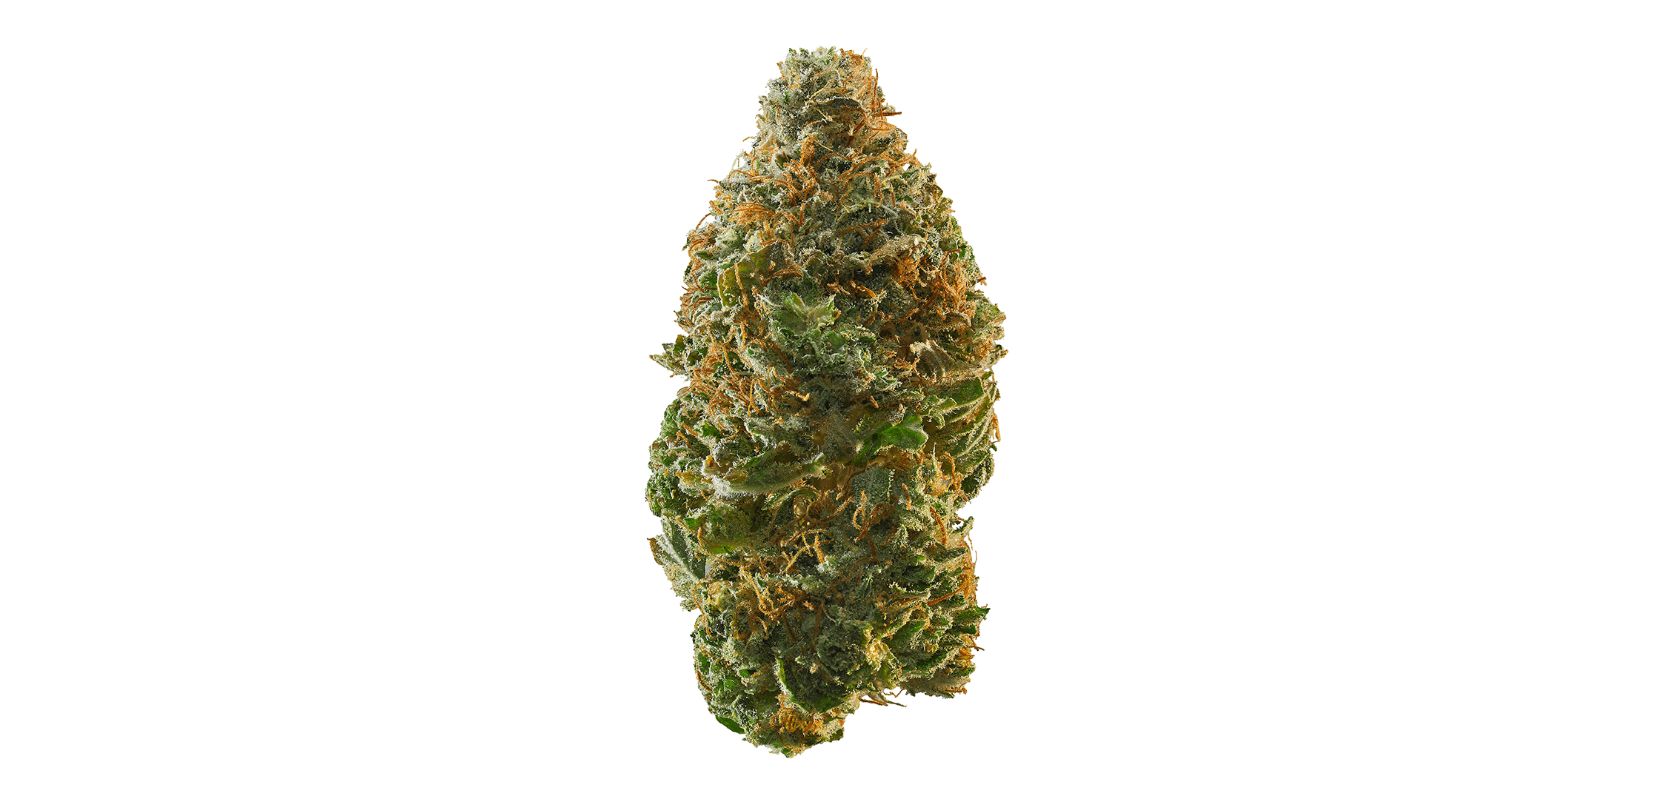 Get ready for a thrill ride as we introduce you to the Trainwreck strain—a potent Sativa-dominant hybrid (80 percent Sativa and 20 percent Indica). 